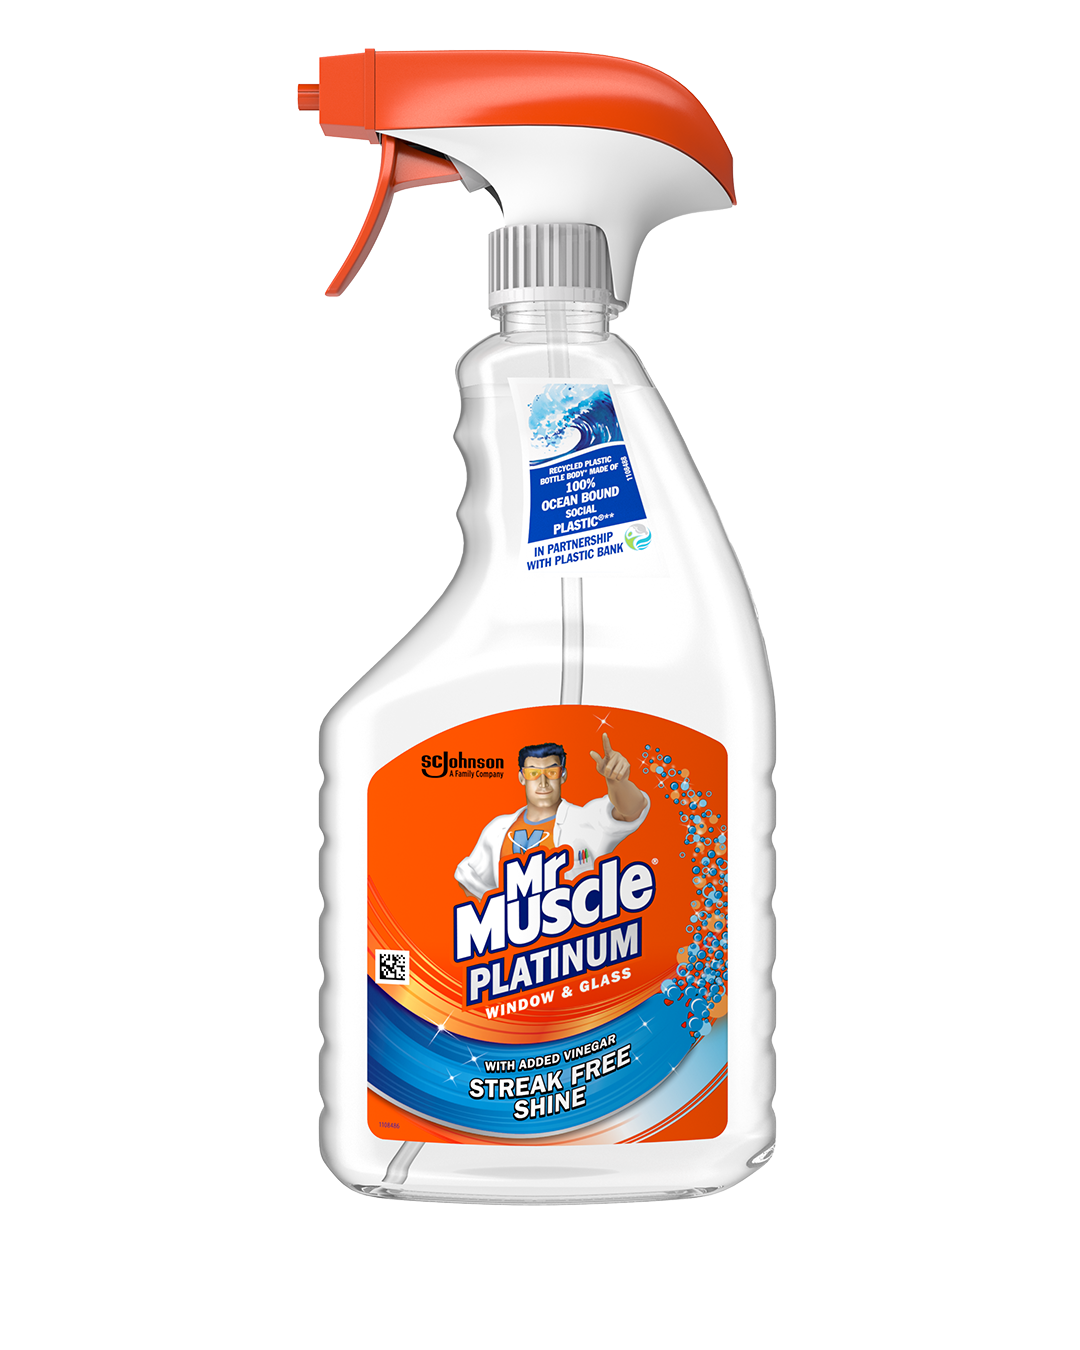 Mr Muscle Platinum Antibacterial Citrus Kitchen Cleaning Spray 750ml